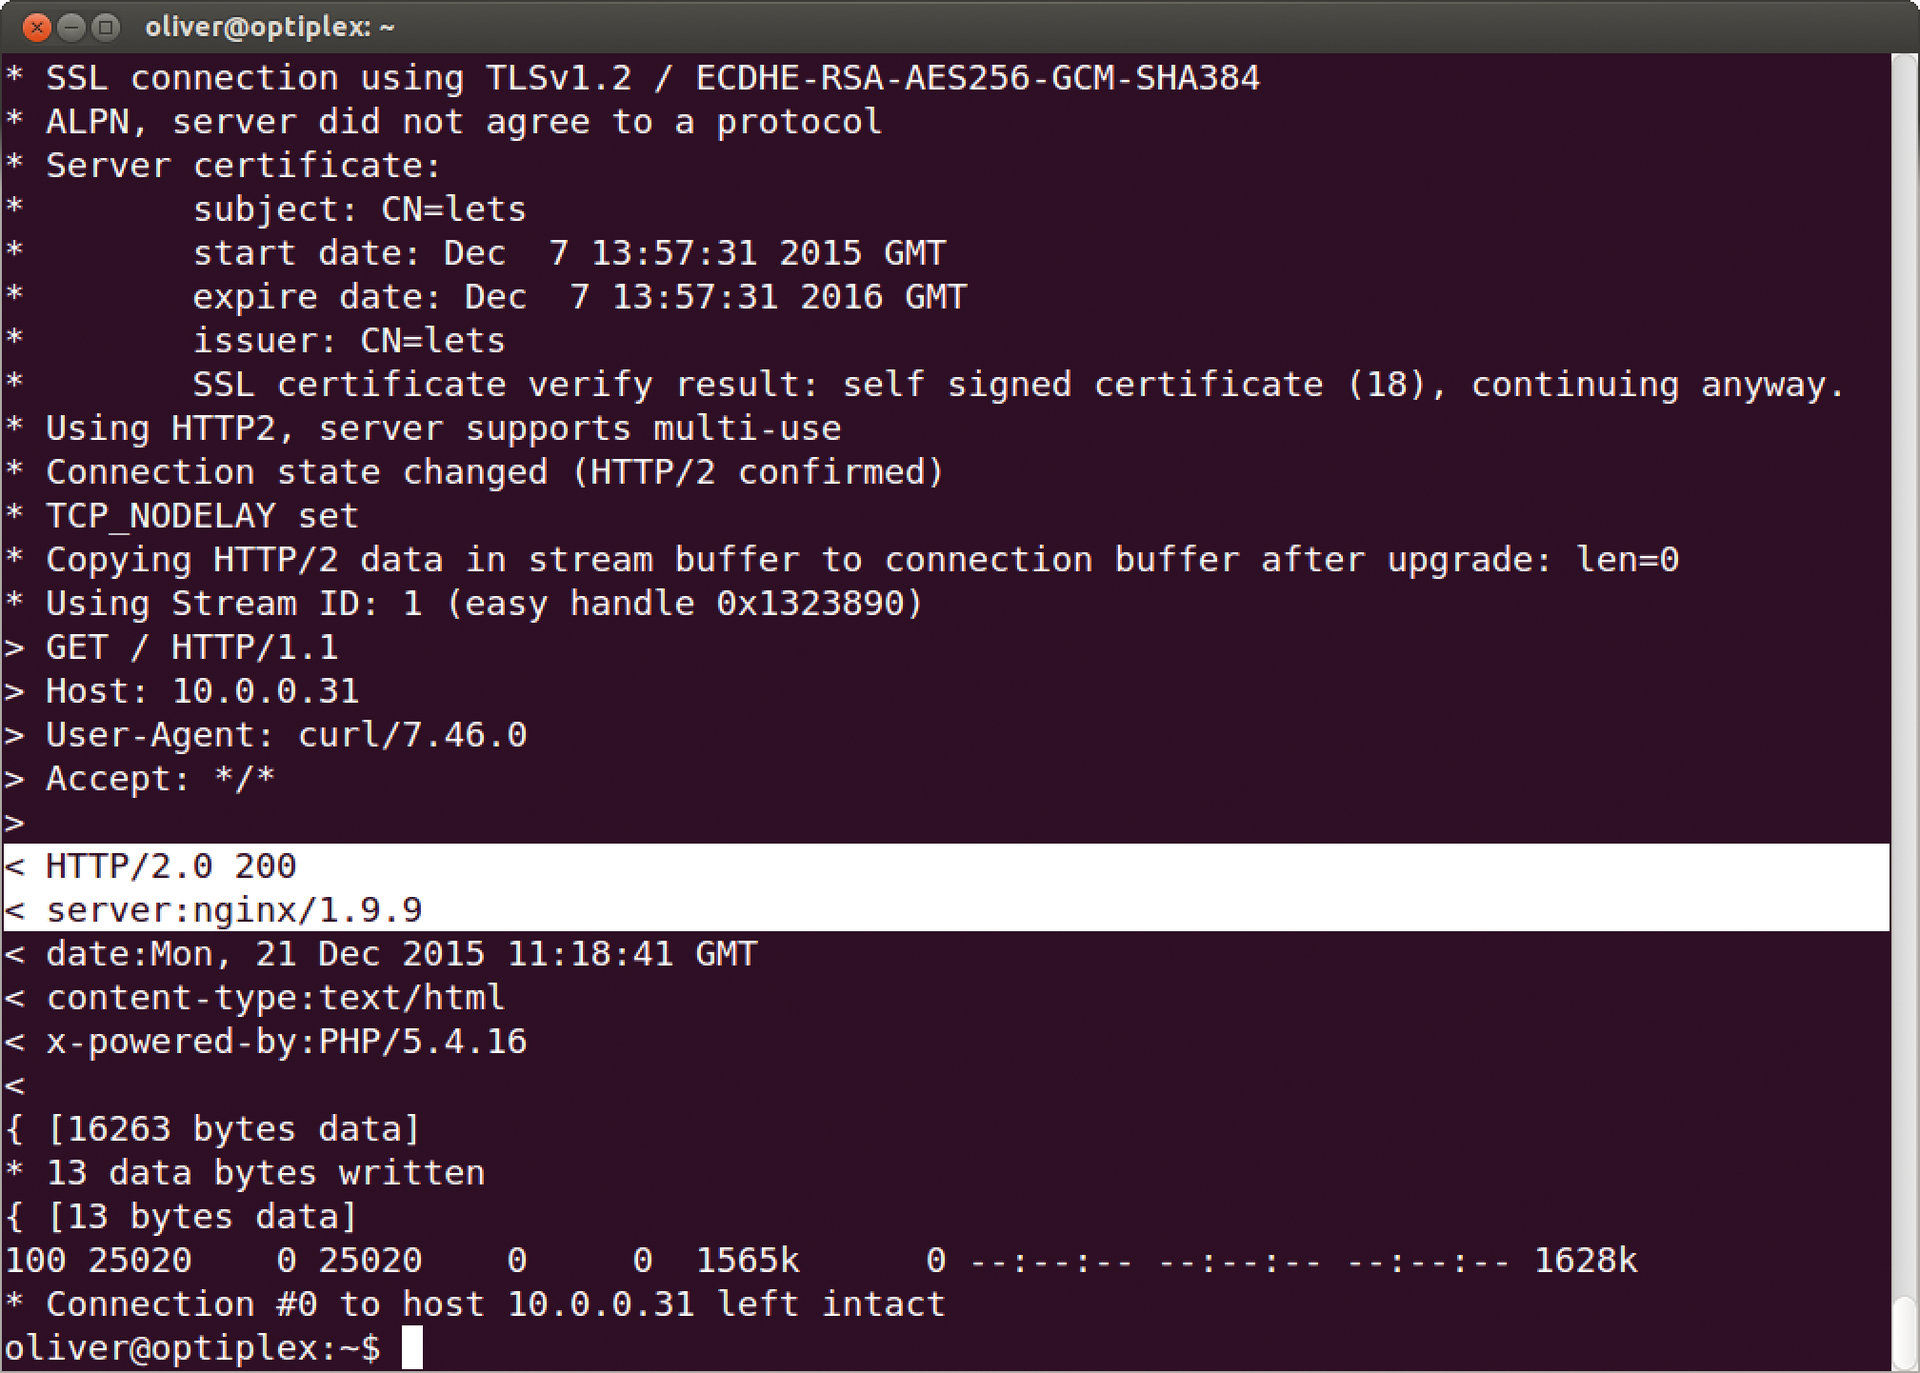 The cURL command-line tool shows details of the HTTP/2 call. 